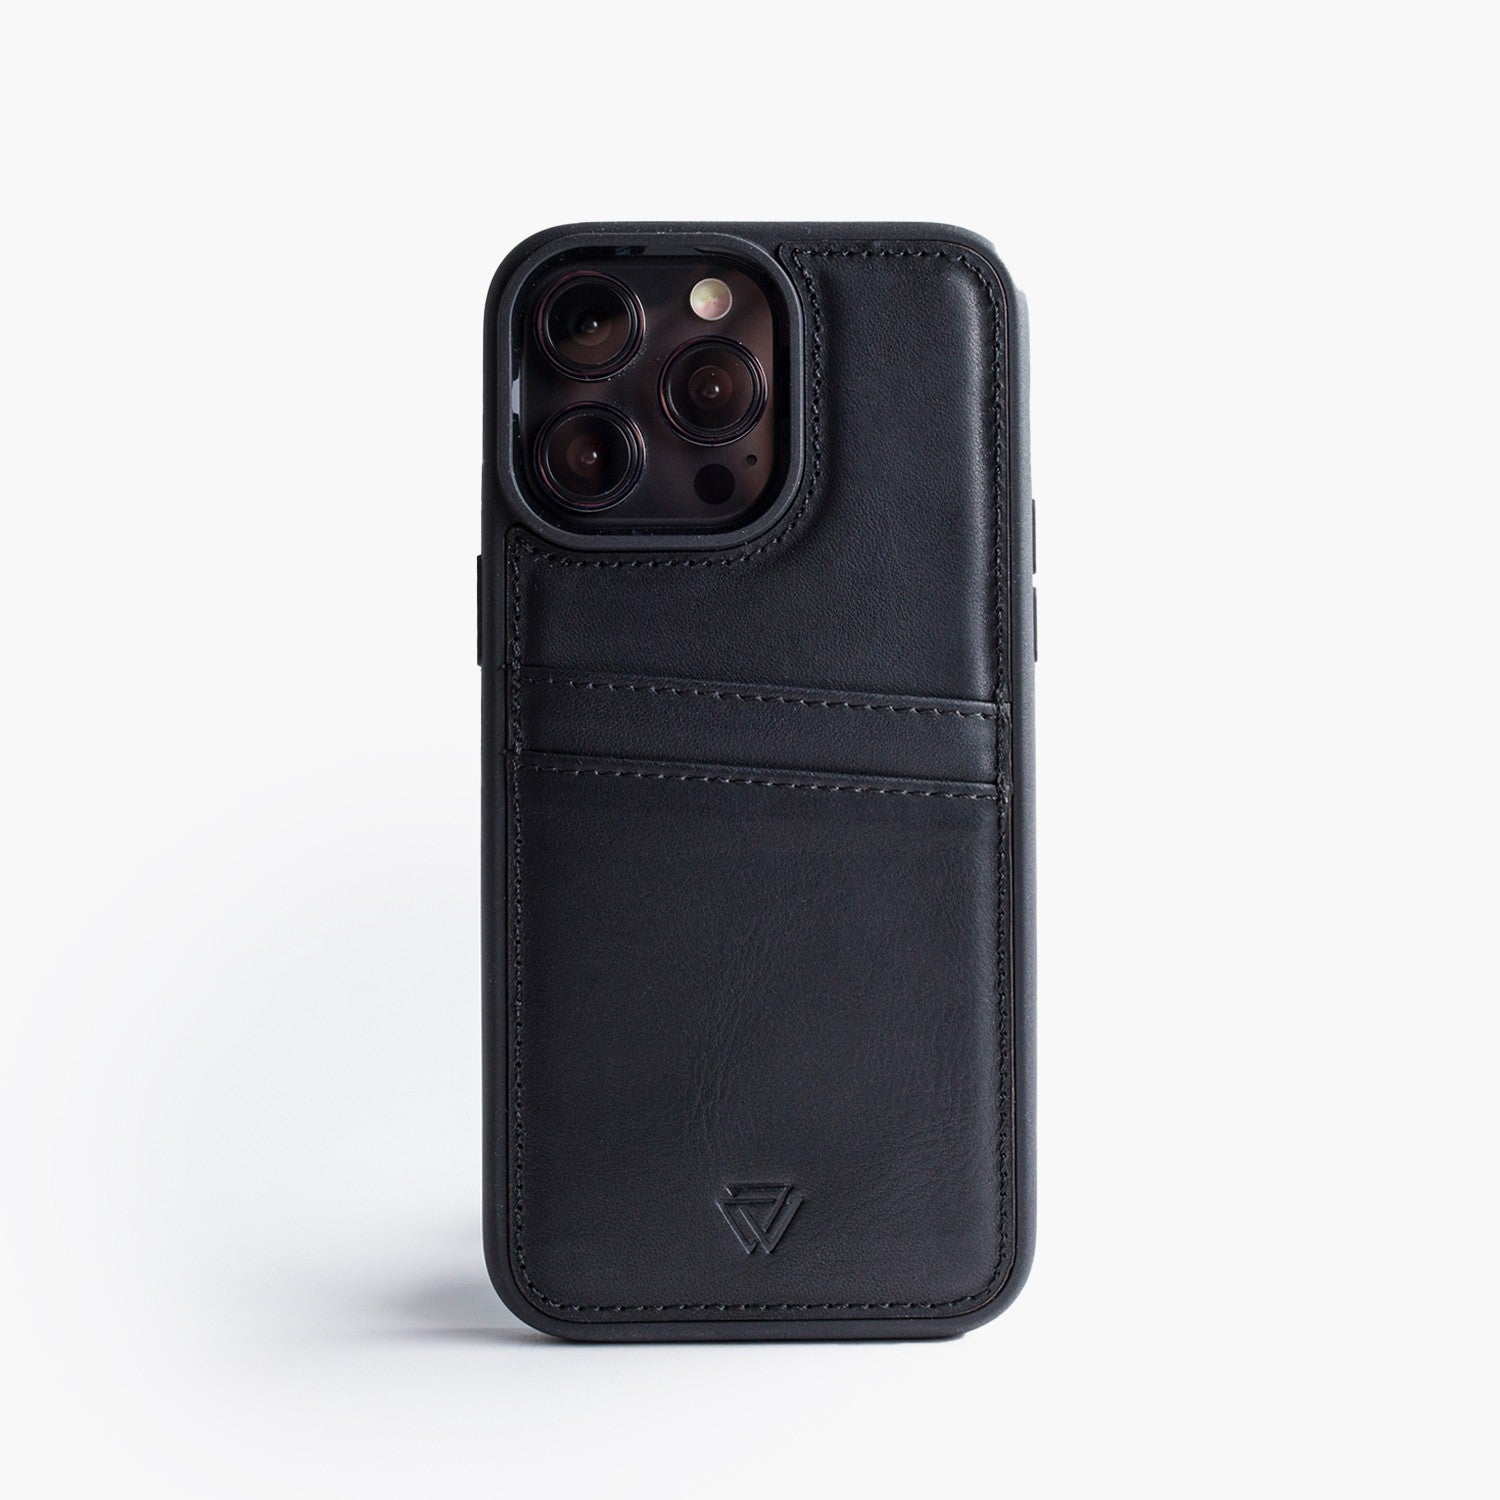 Wachikopa leather Back Cover C.C. Case for iPhone 12 Pro Max Black